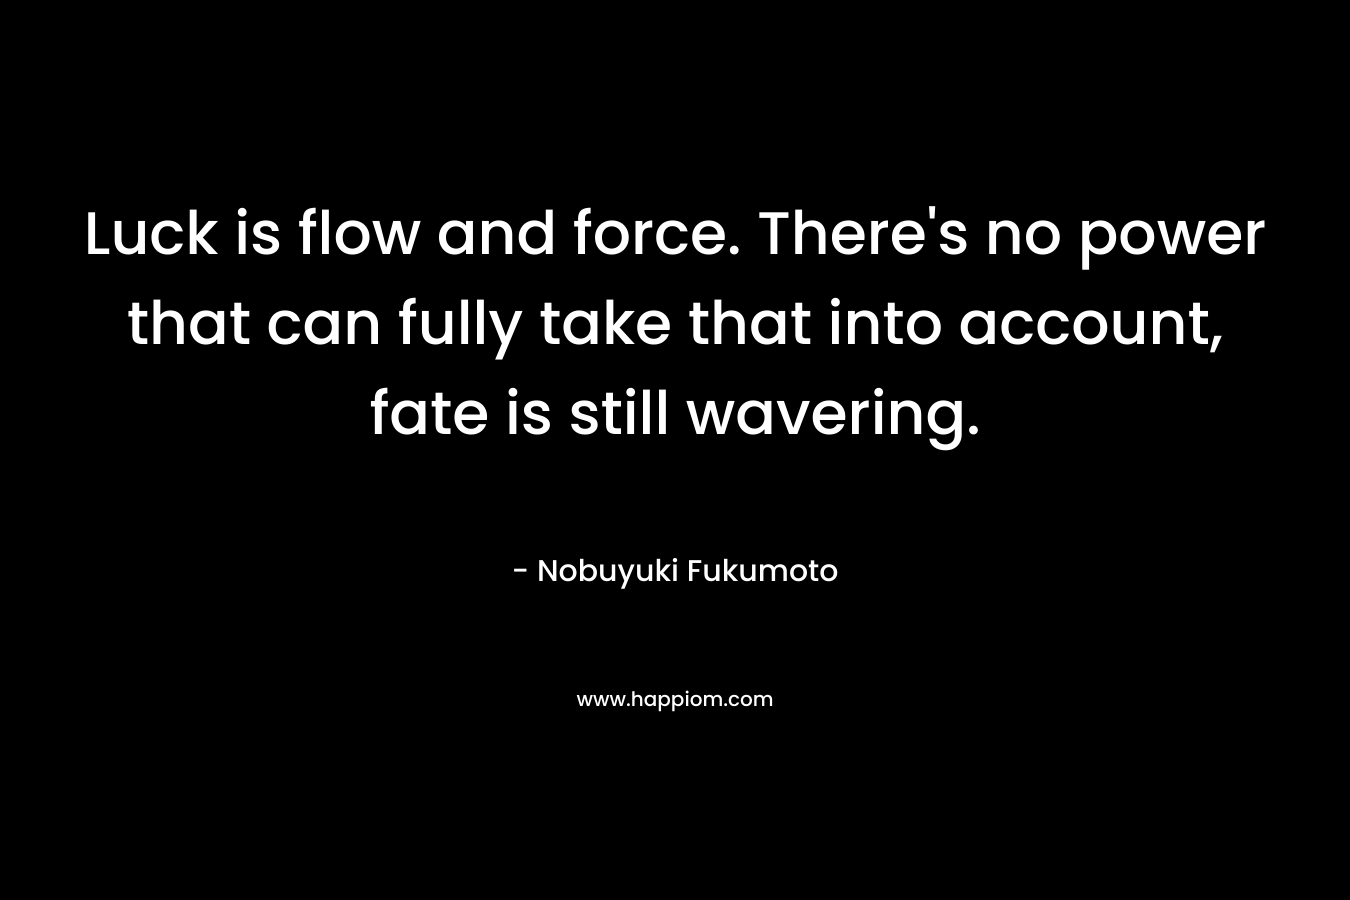 Luck is flow and force. There's no power that can fully take that into account, fate is still wavering.